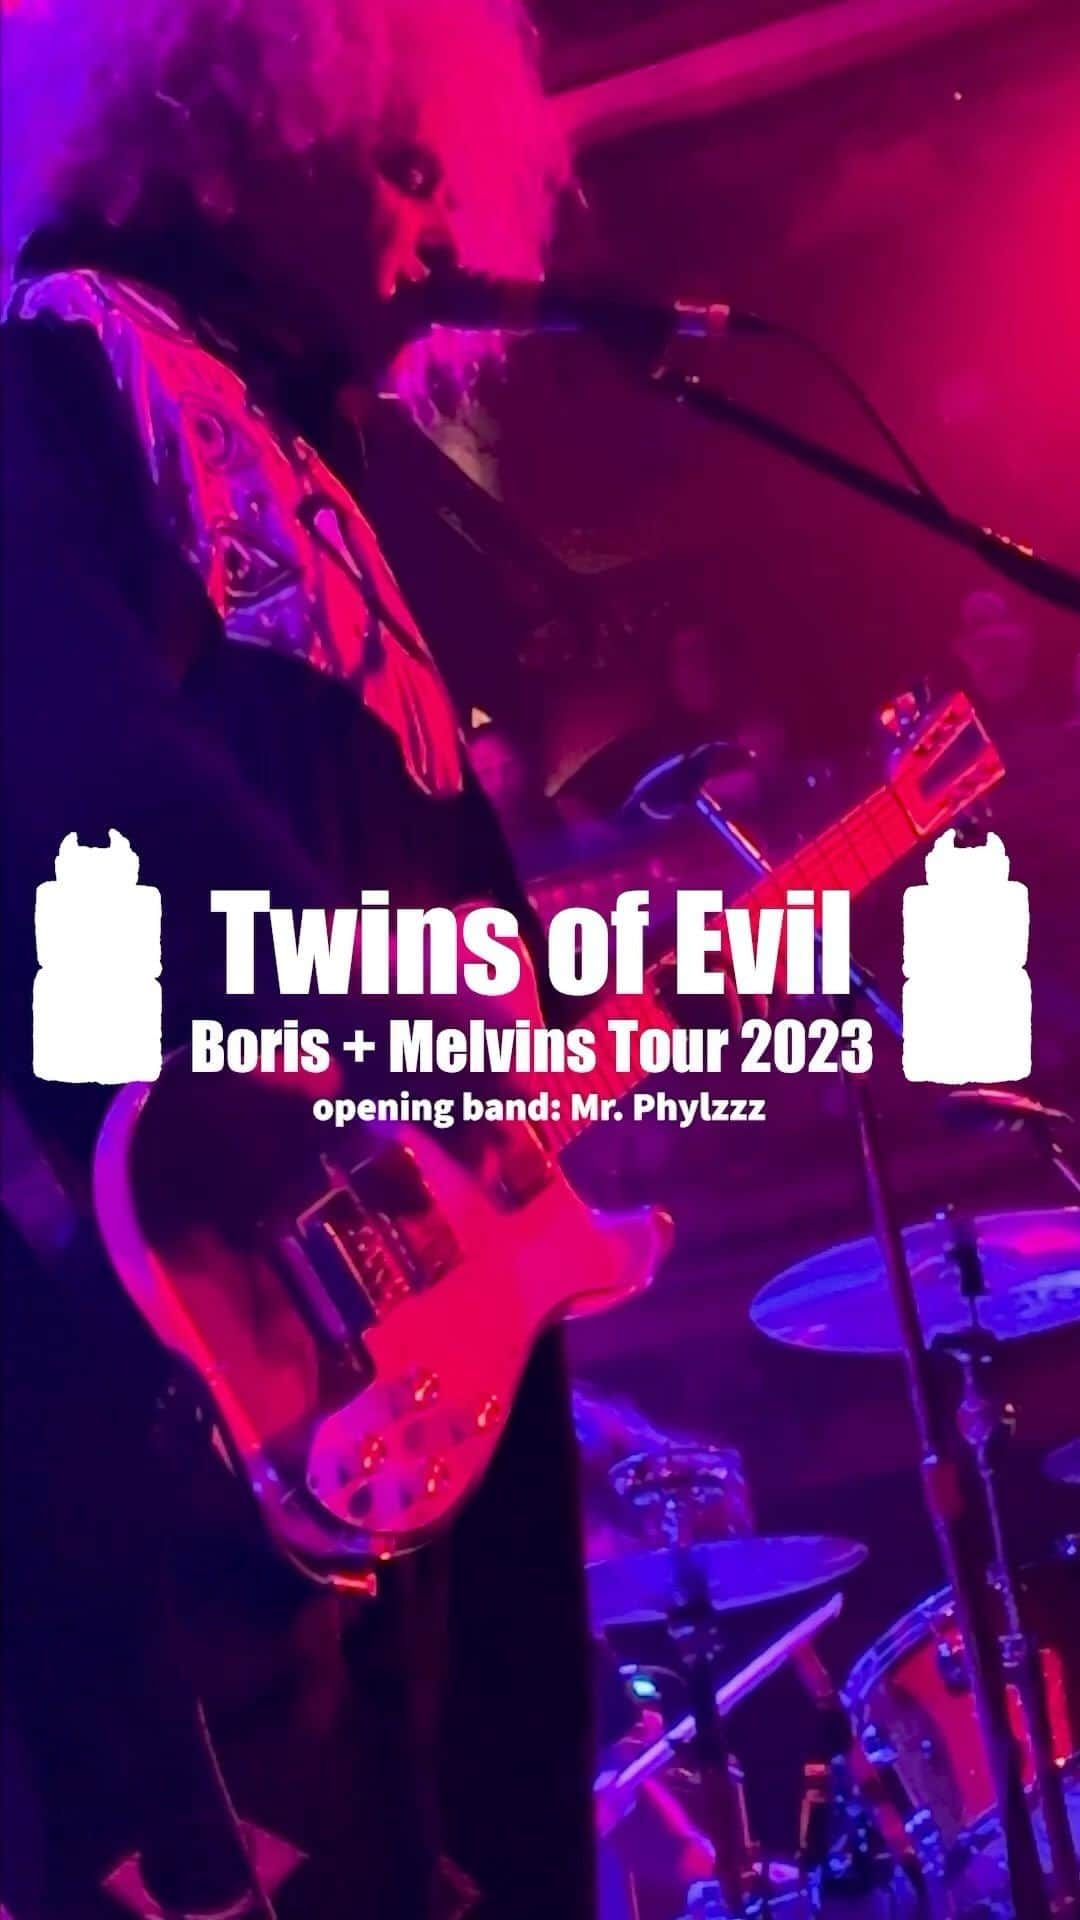 BORISのインスタグラム：「Boris + Melvins “Twins of Evil” US tour 10 more shows! Don’t miss!  Ticket links on highlight “Twins of Evil”  10/2 Houston, TX Warehouse Live – Studio 10/3 Austin, TX Mohawk 10/4 Dallas, TX Granada Theater 10/5 Oklahoma City, OK Beer City Music Hall 10/6 Tulsa, OK Cain’s Ballroom 10/7 Lawrence, KS The Bottleneck 10/9 Denver, CO Summit 10/11 Albuquerque, NM Sunshine Theater 10/13 Tempe, AZ Marquee Theatre ※without Melvins 10/16 San Diego, CA House of Blues」